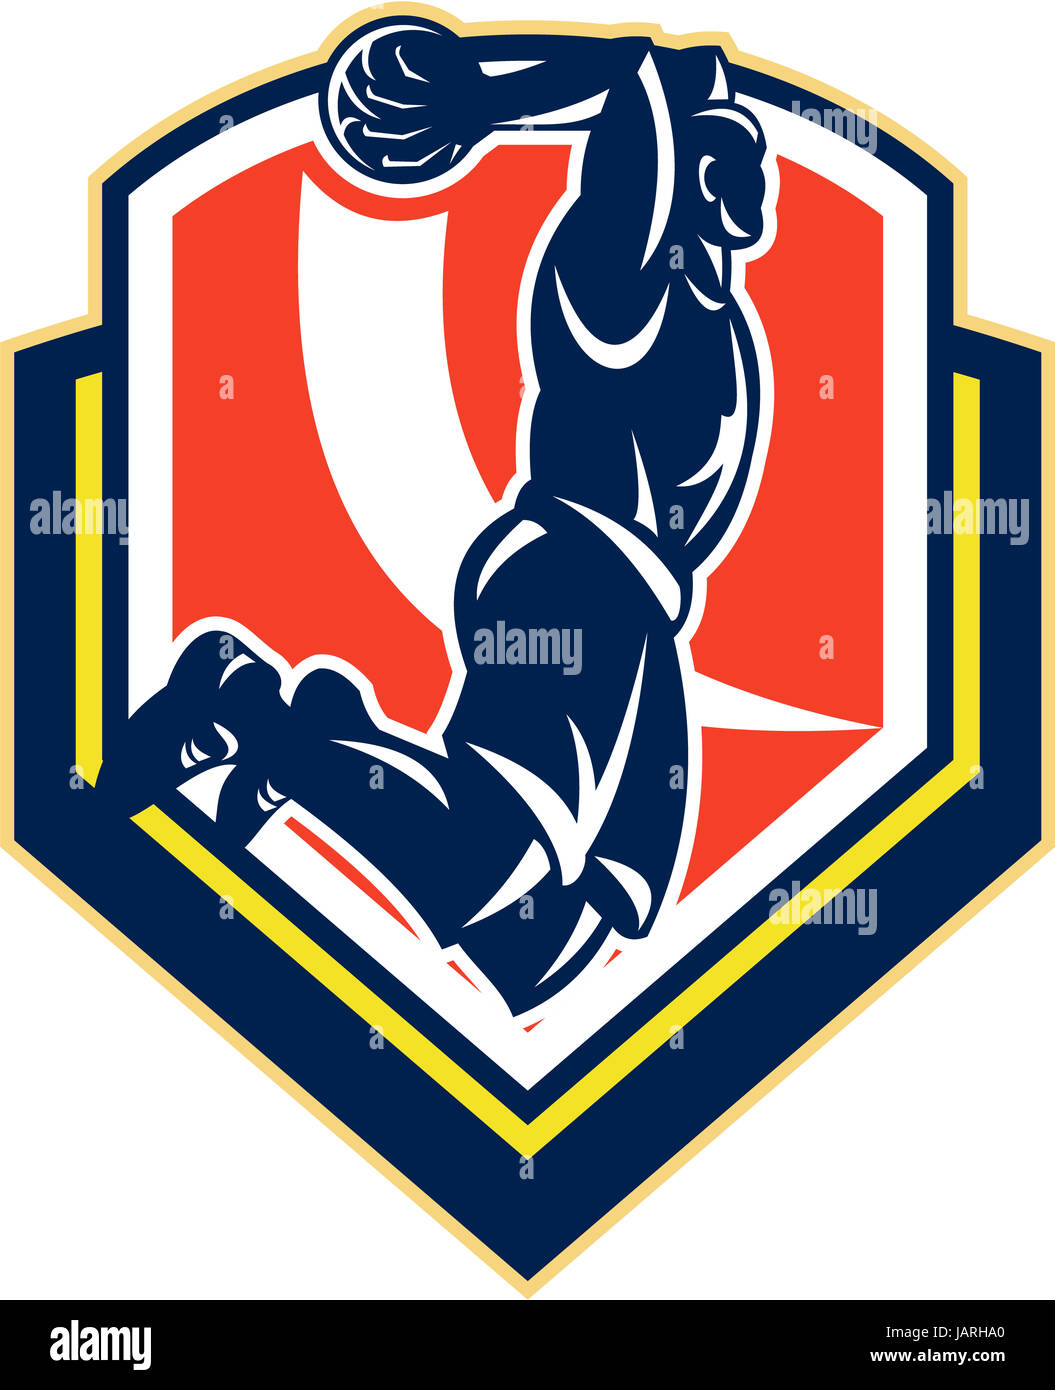 Illustration of a basketball player jumping dunking ball set inside shield crest done in retro style. Stock Photo